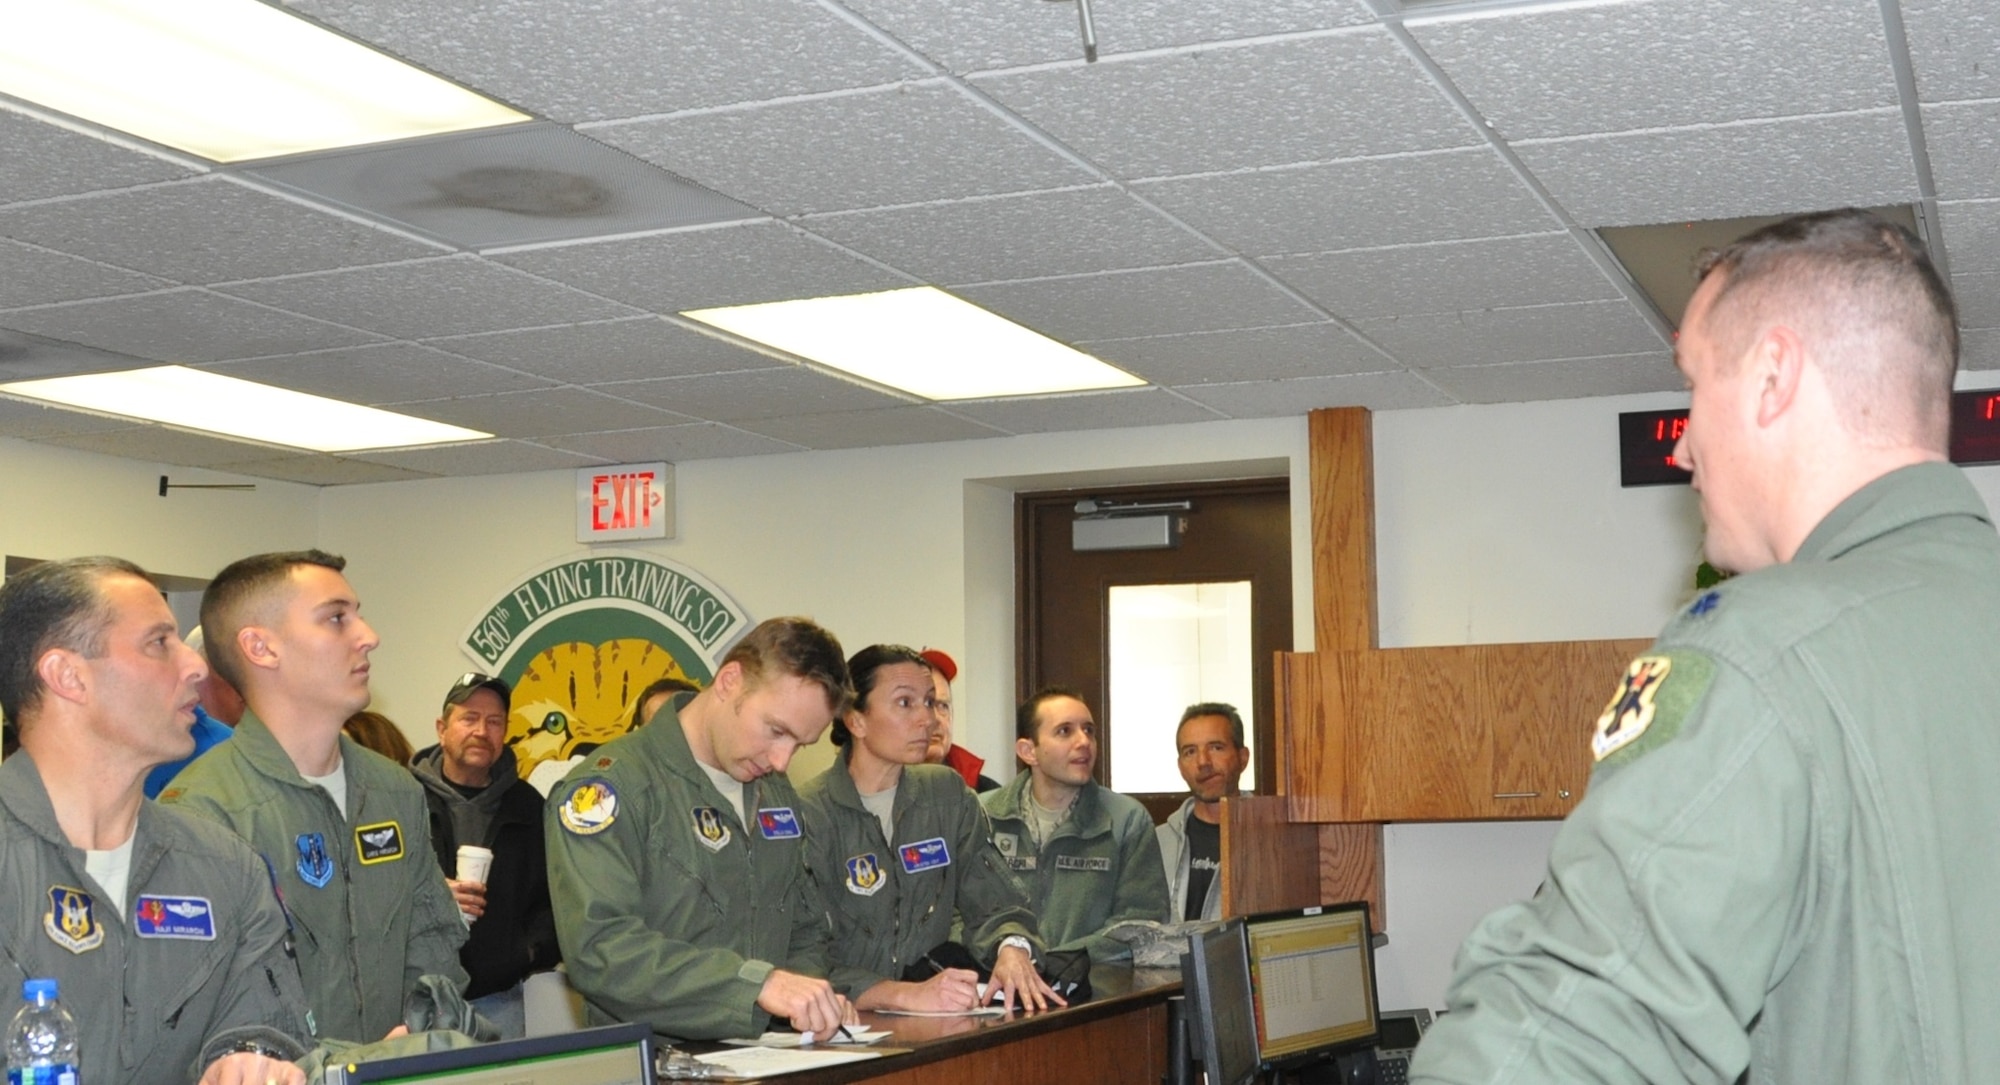 The Mirarchis, left, join squadron teammates who will fly the four-ship mission with them during the lieutenant colonel’s fini flight. Mission crew members included Maj. Klayton Ives (ship one, backseat flying with Colonel Mirarchi), Maj. Colin Cima (ship two, front seat, flying with Lieutenant Mirarchi), Lt. Col. Kristen Kent (ship three, front seat), Maj. Mark Youens (ship three, back seat), Lt. Col. James Miller (ship four, front seat) and Lt. Col. Katherine Burkhead (ship four, back seat). (U.S. Air Force photo by Debbie Gildea).